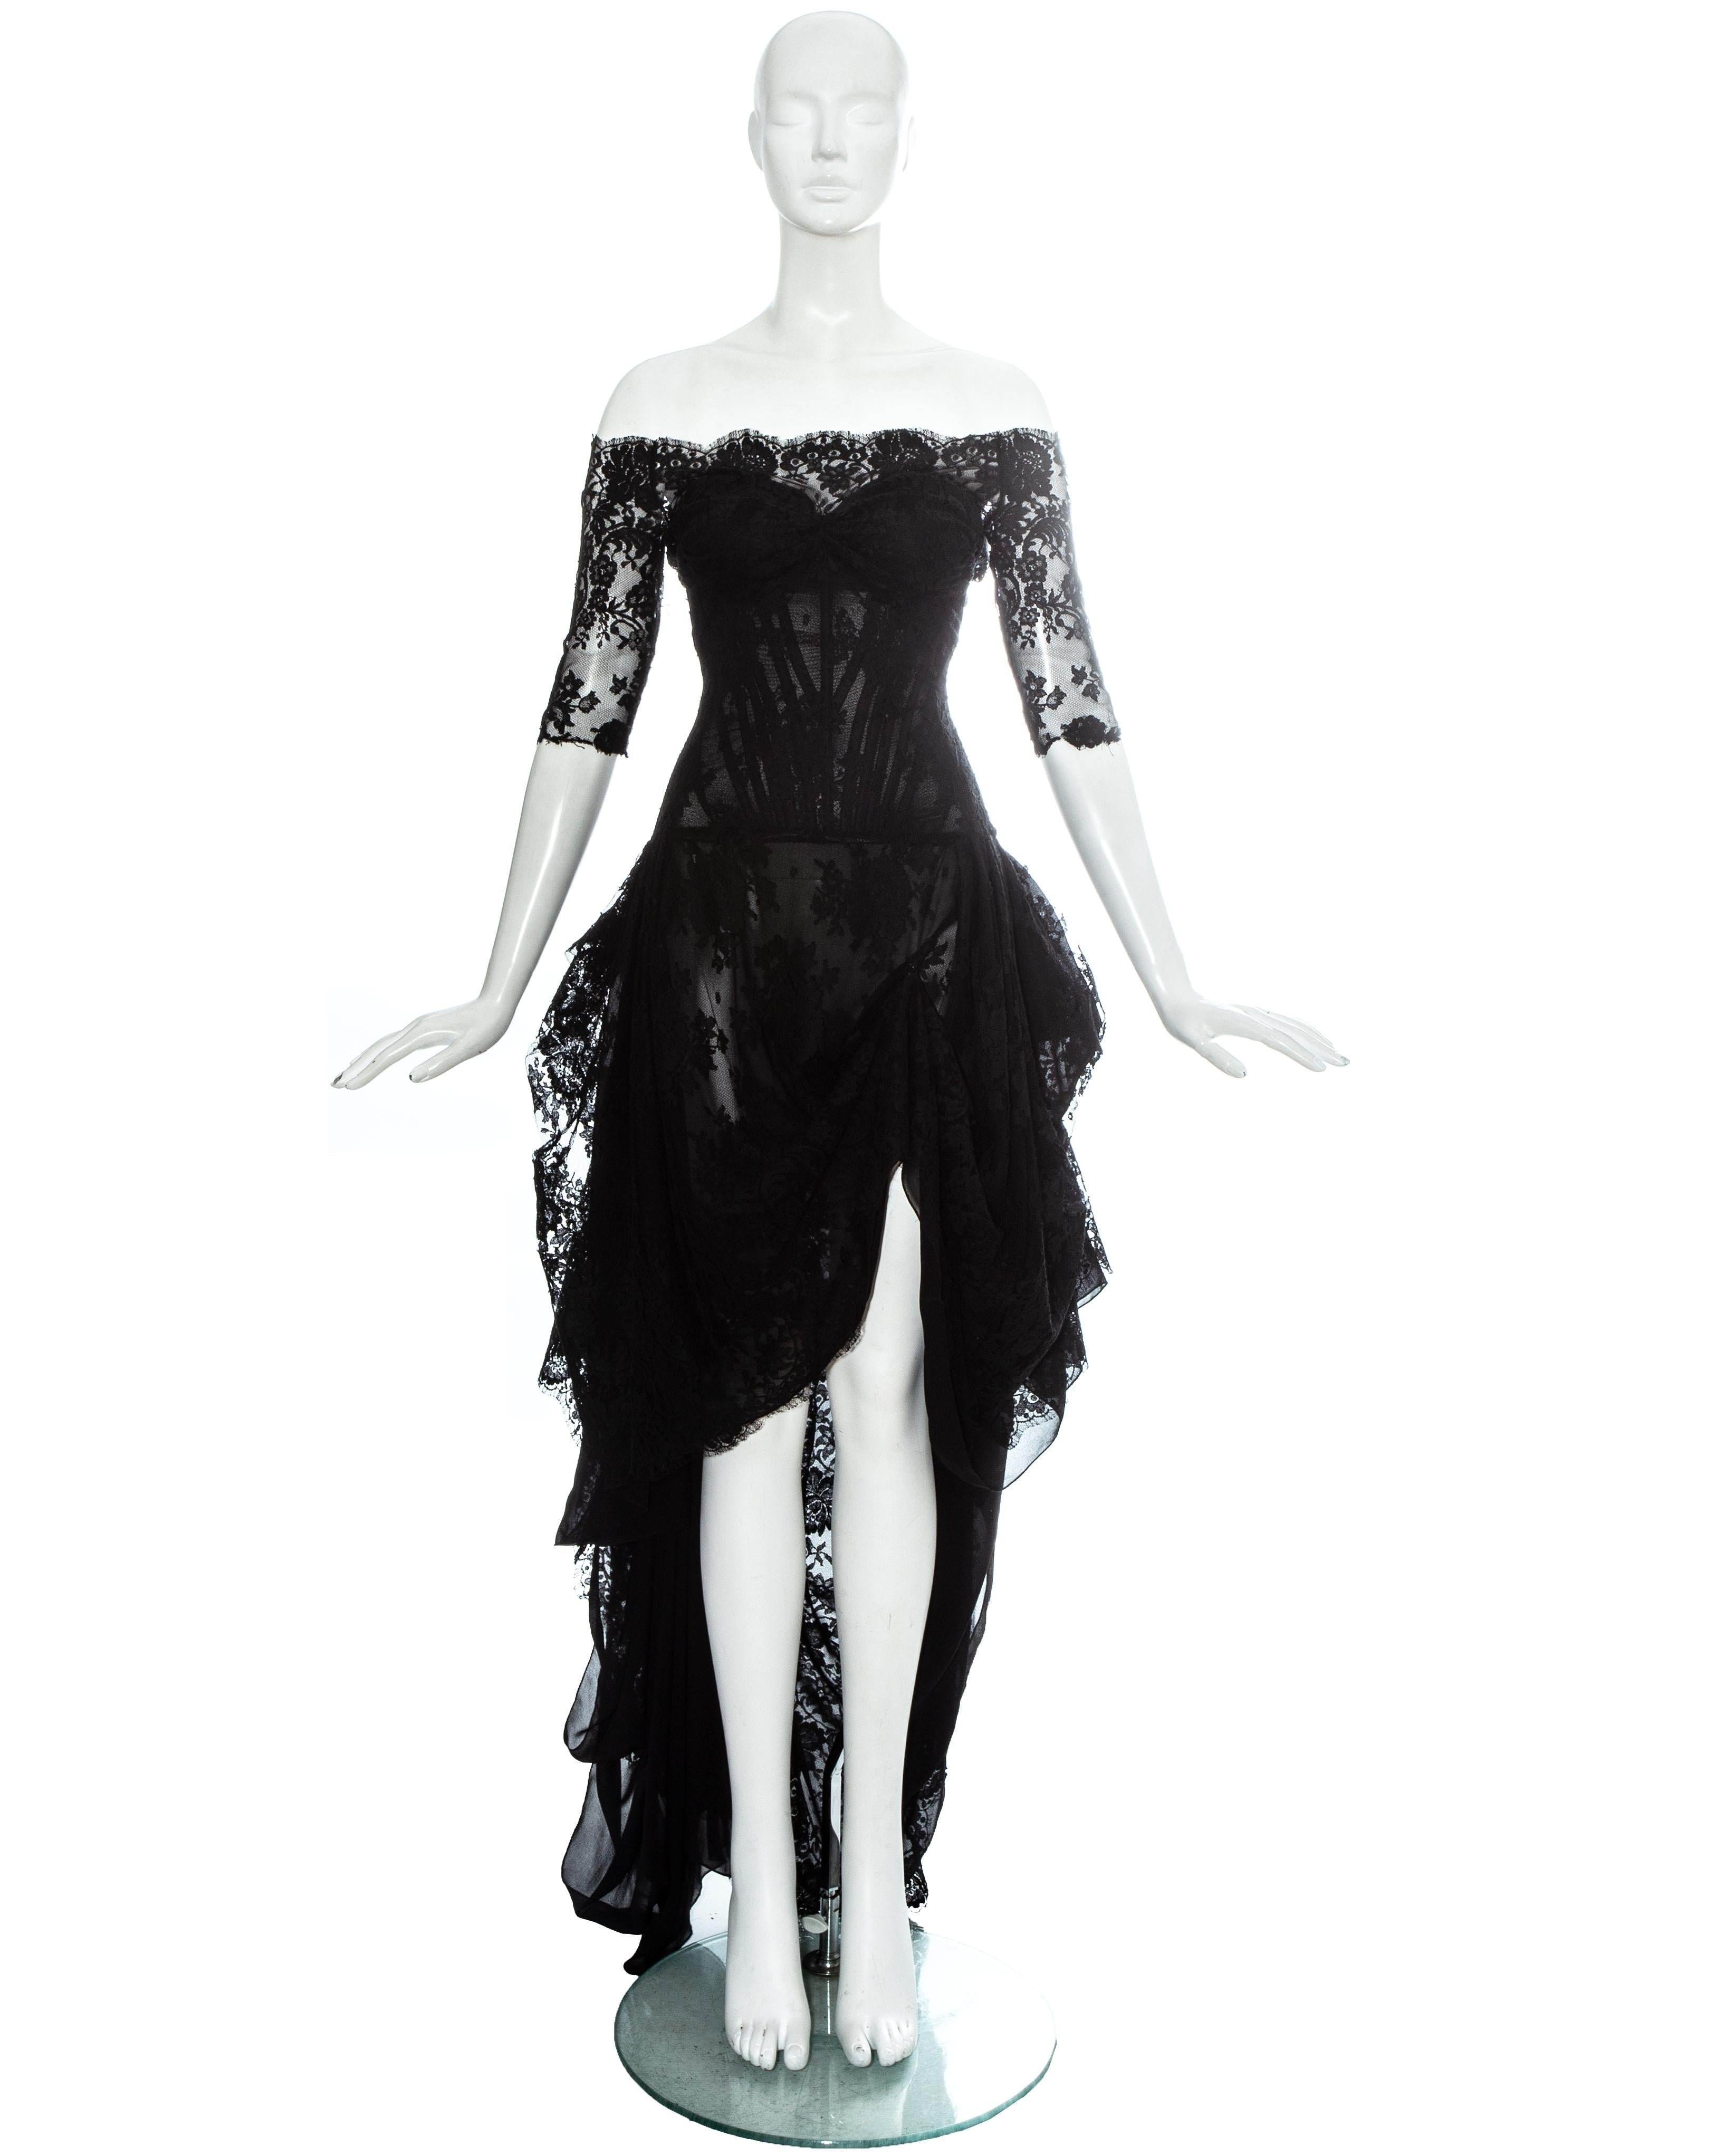 Alexander McQueen black lace evening dress with internal corset, dropped shoulders, low back with bustled rear, the skirt cut short at the front with an optional hook-and eye fastening to create a leg slit, and long trained hem

'Sarabande',